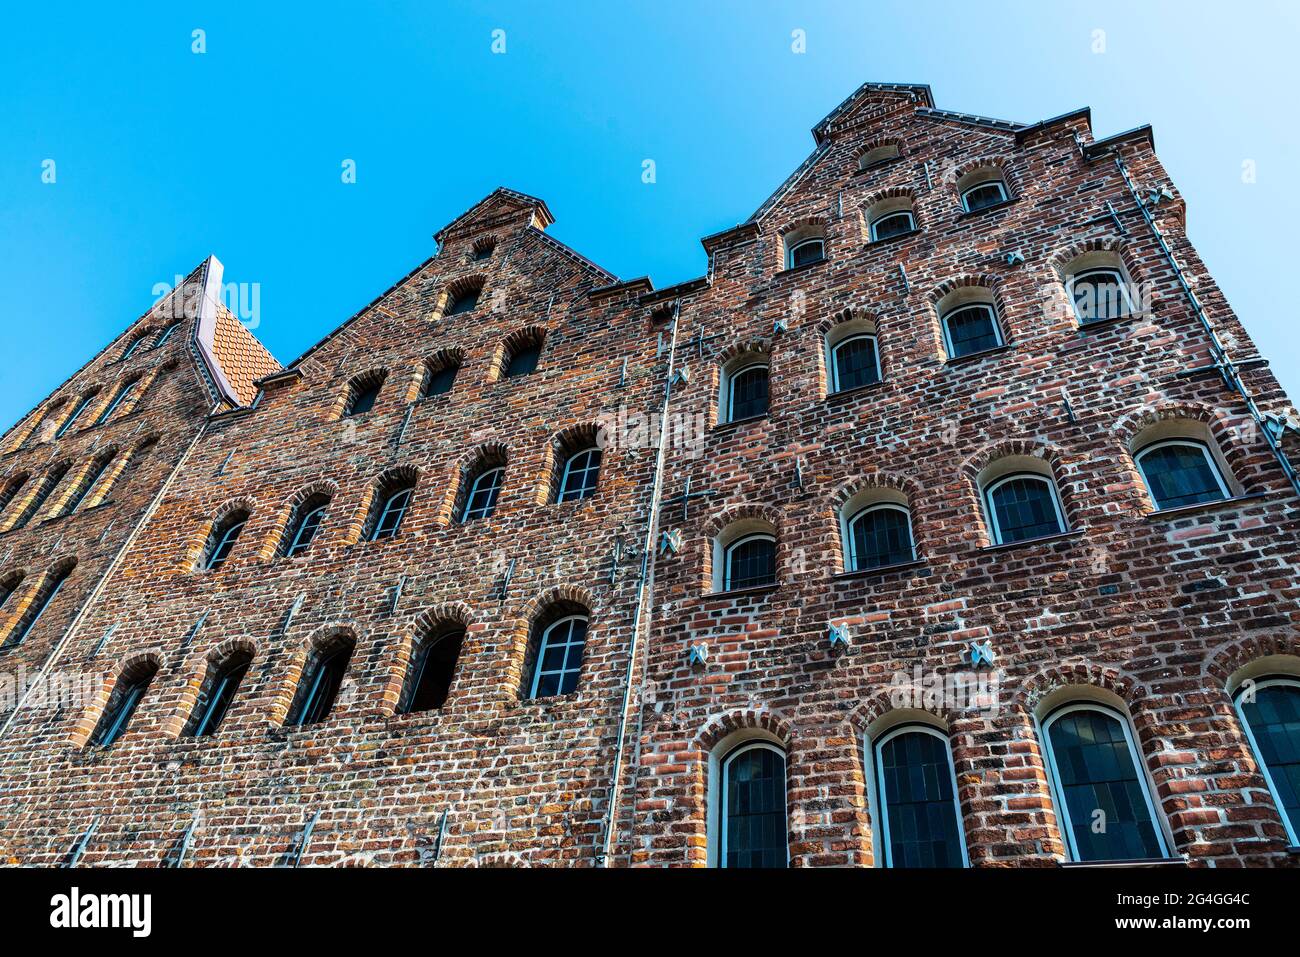 Facade of the medieval salt warehouses or Salzspeicher next to Holsten Gate or Holstentor in Lübeck, Germany Stock Photo